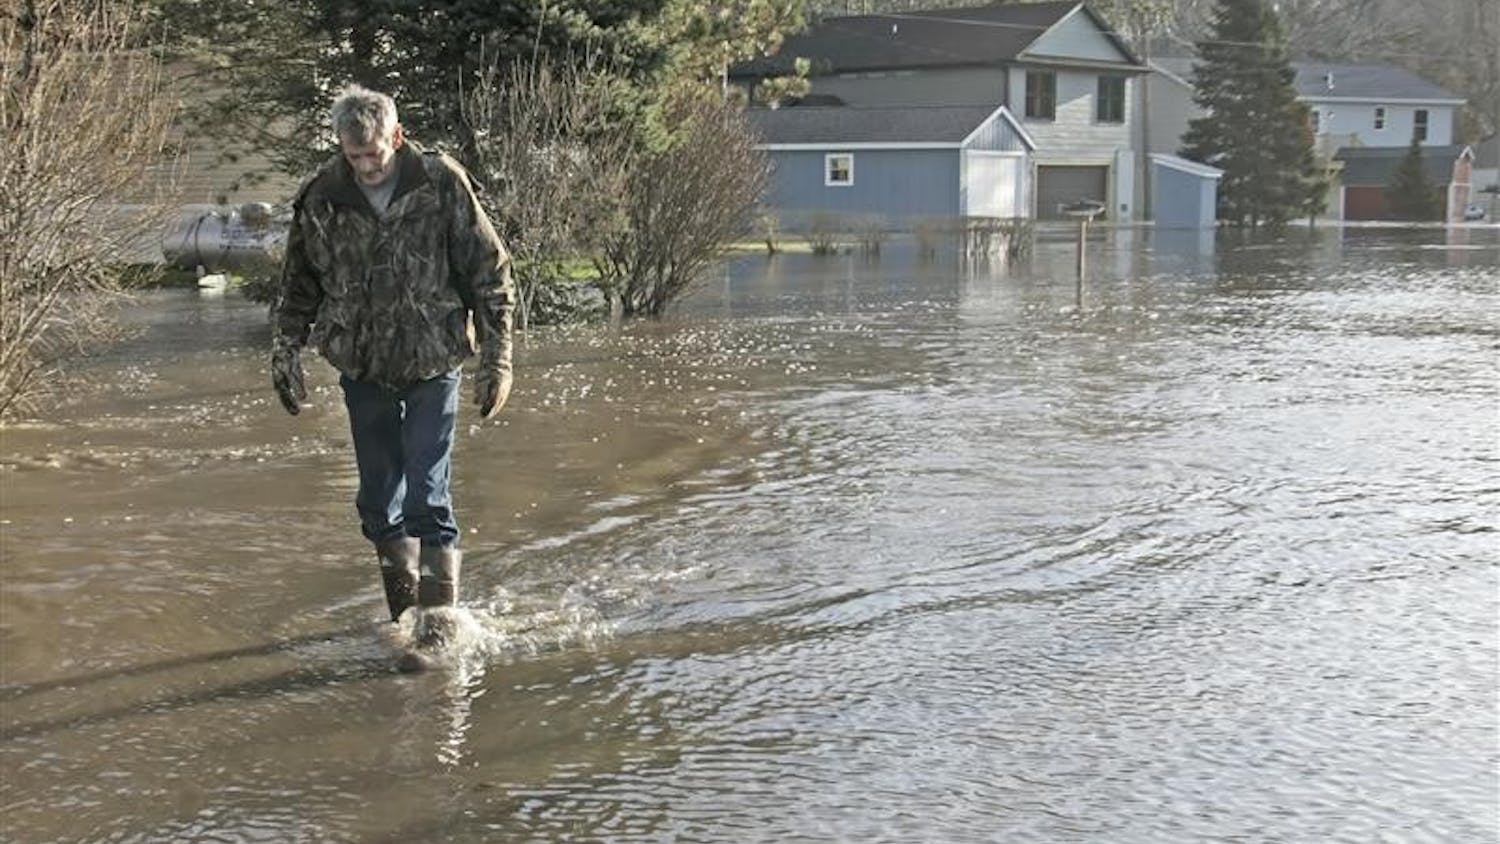 Steve Clark walks back after checking on his home as the Tippecanoe River still rises Wednesday, March 11, 2009, near Delphi, Ind. Clark left his home early Wednesday morning after the water rose to high. 